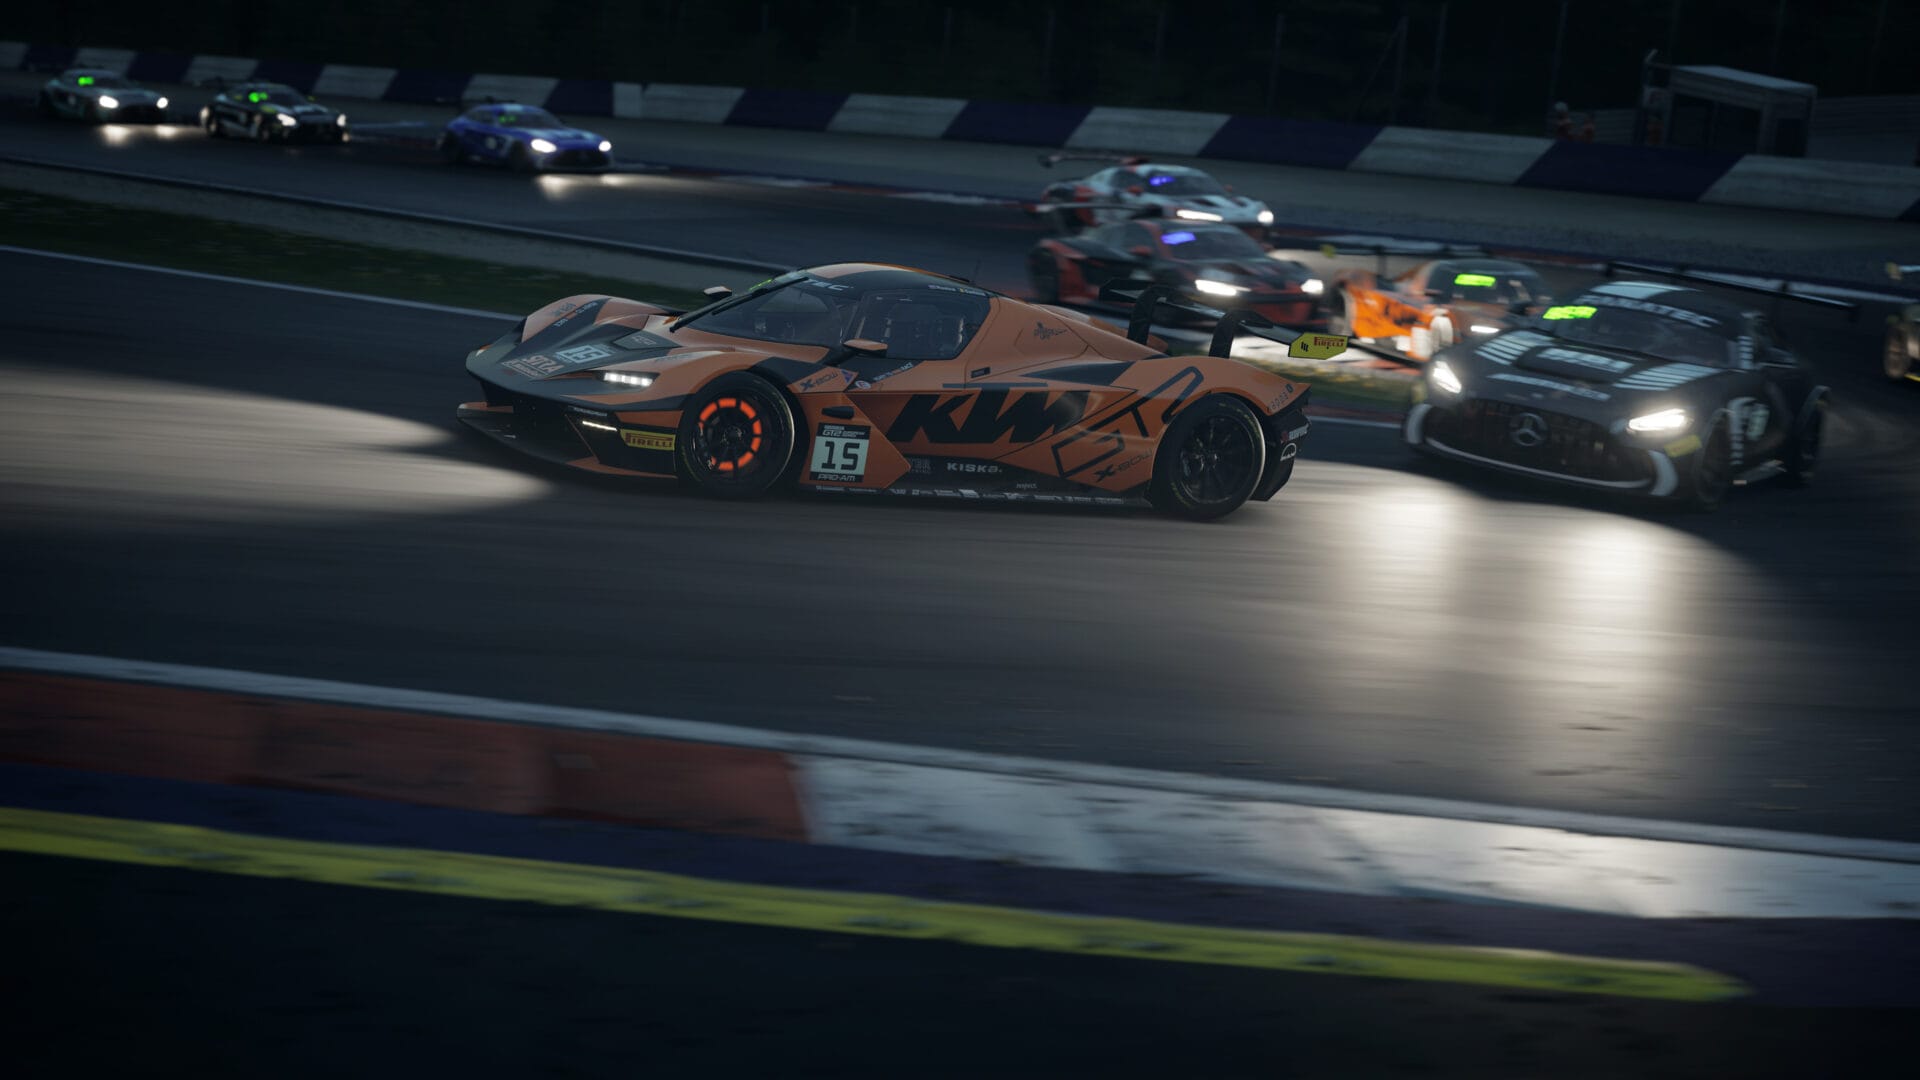 Explore the excitement of the latest DLC in Assetto Corsa Competizione, featuring the brand new cutting-edge GT2 category cars racing at the iconic Red Bull Ring